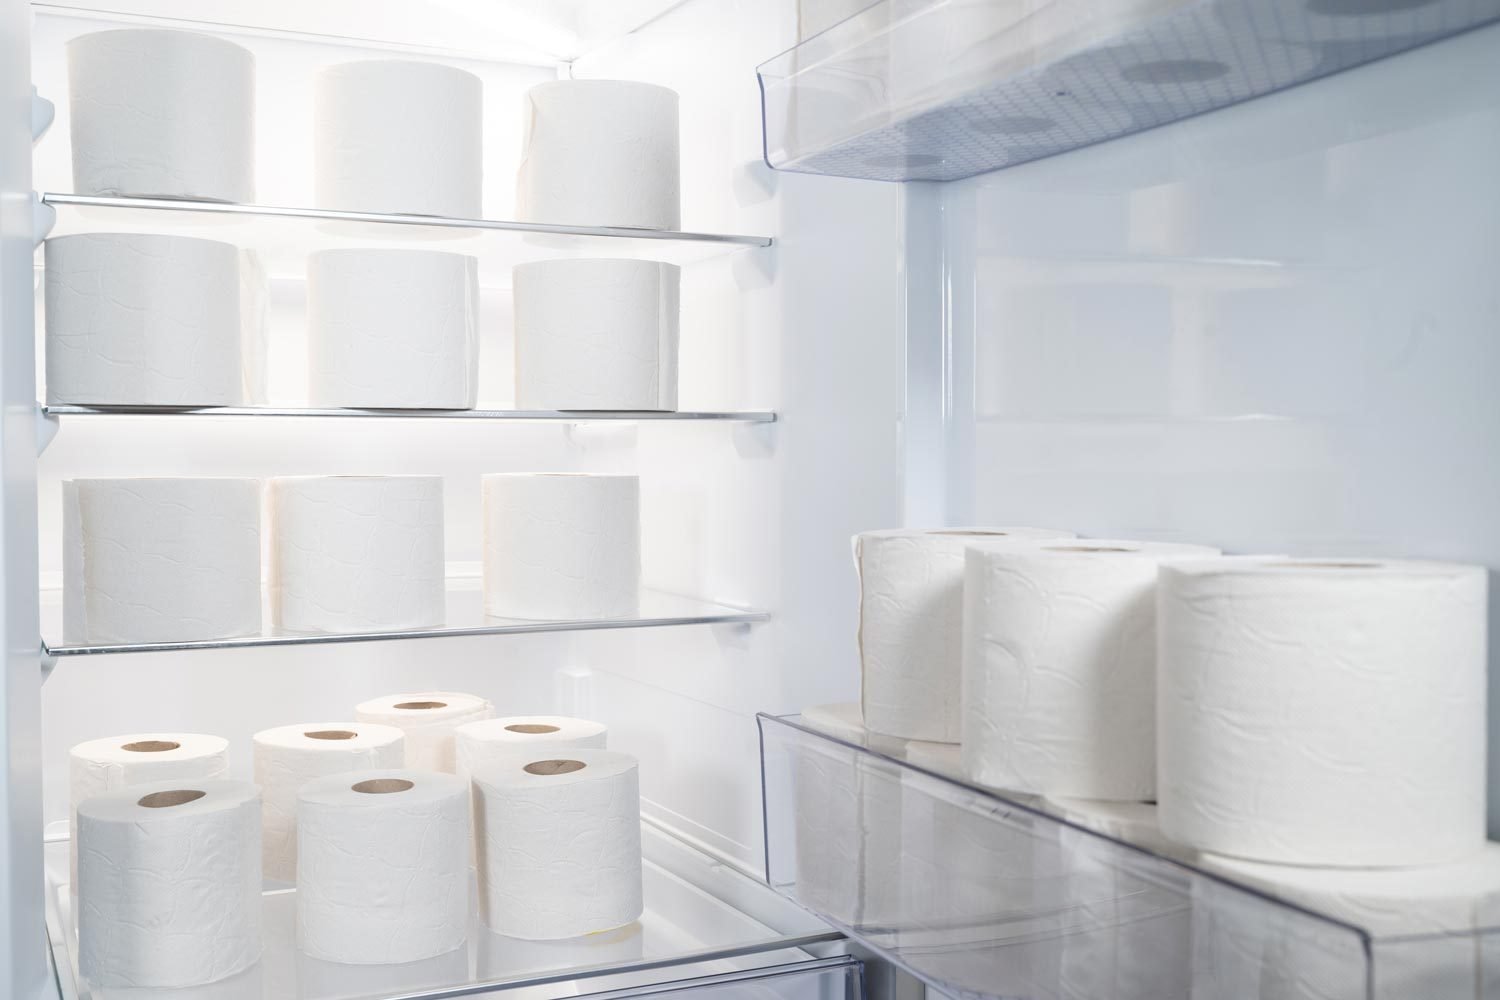 Why Everyone's Suddenly Putting Toilet Paper in the Fridge